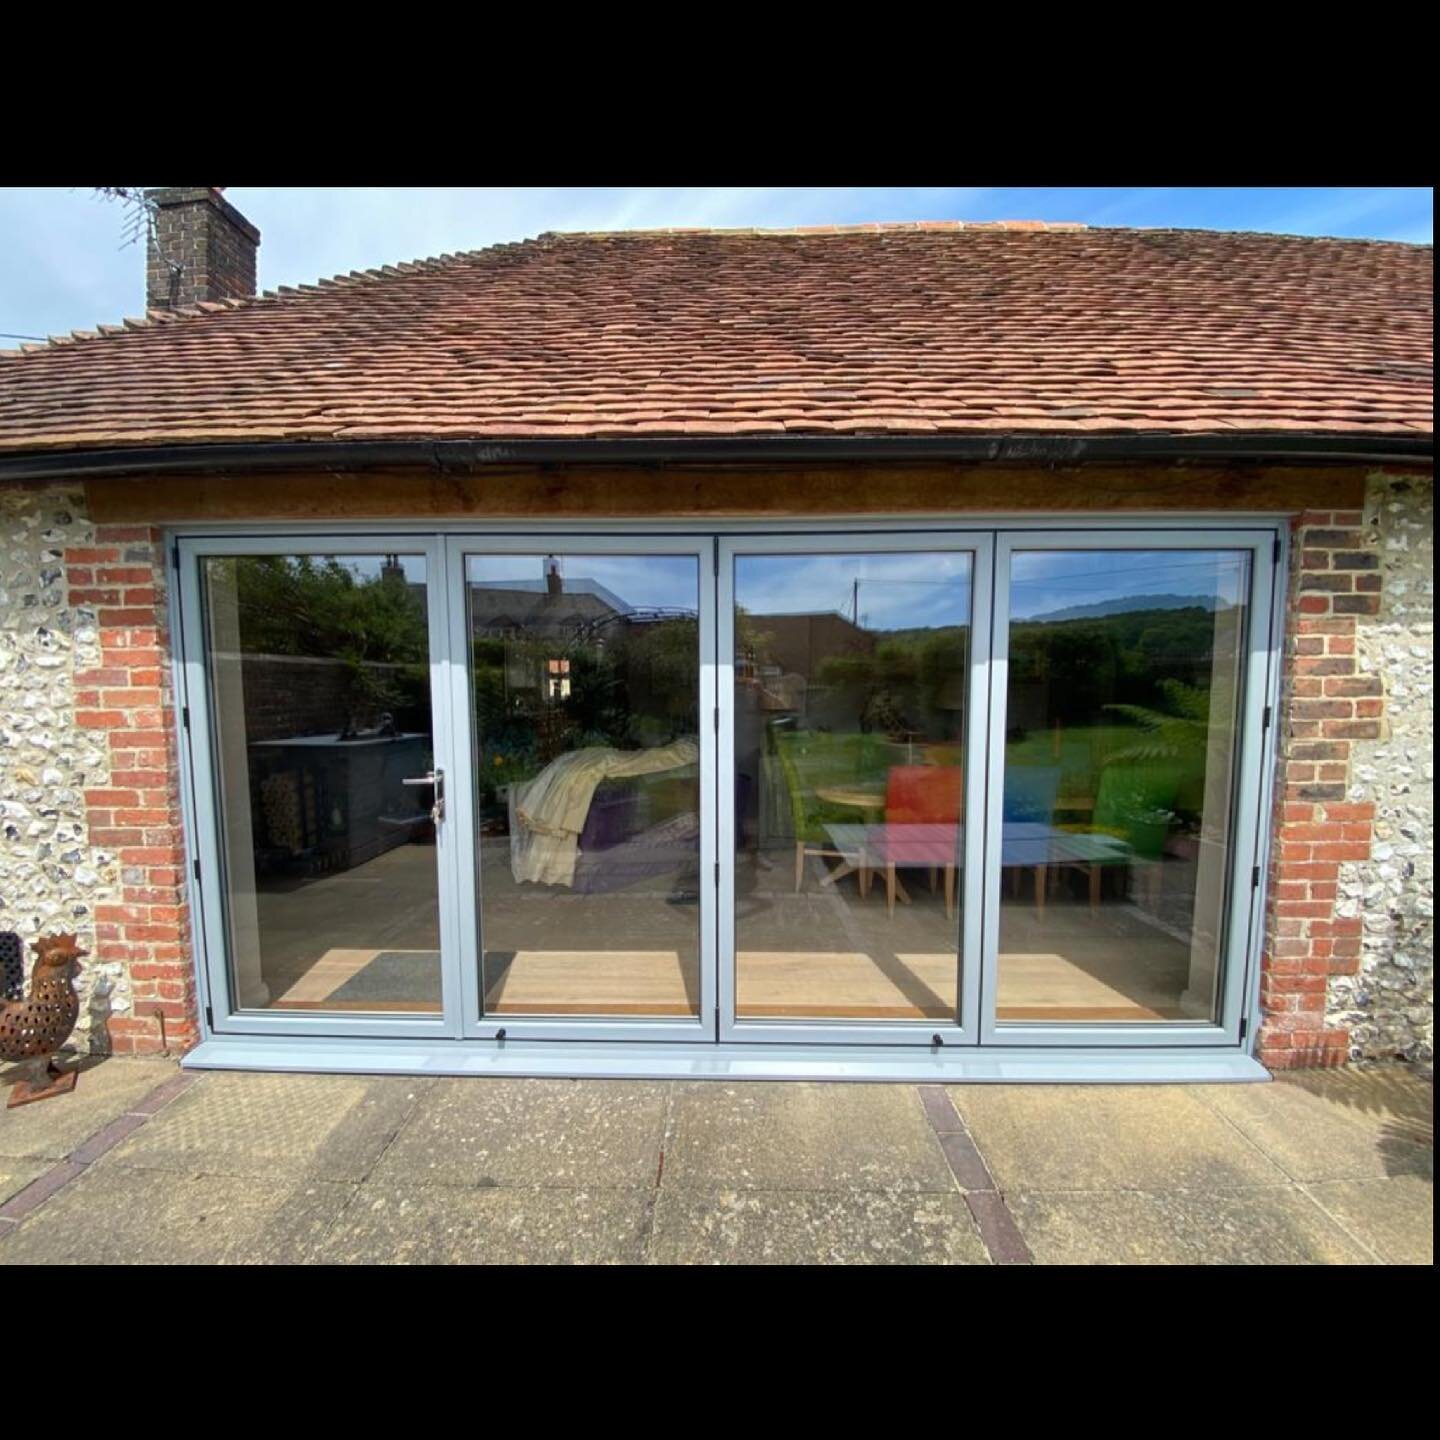 Our #ExclusiveRange of bifolding aluminium doors. Not only do they provide a sleek, modern look but they also maximise light and space to reinvigorate your home!

Please don&rsquo;t hesitate to Call, WhatsApp or Email any enquiries you may have to th